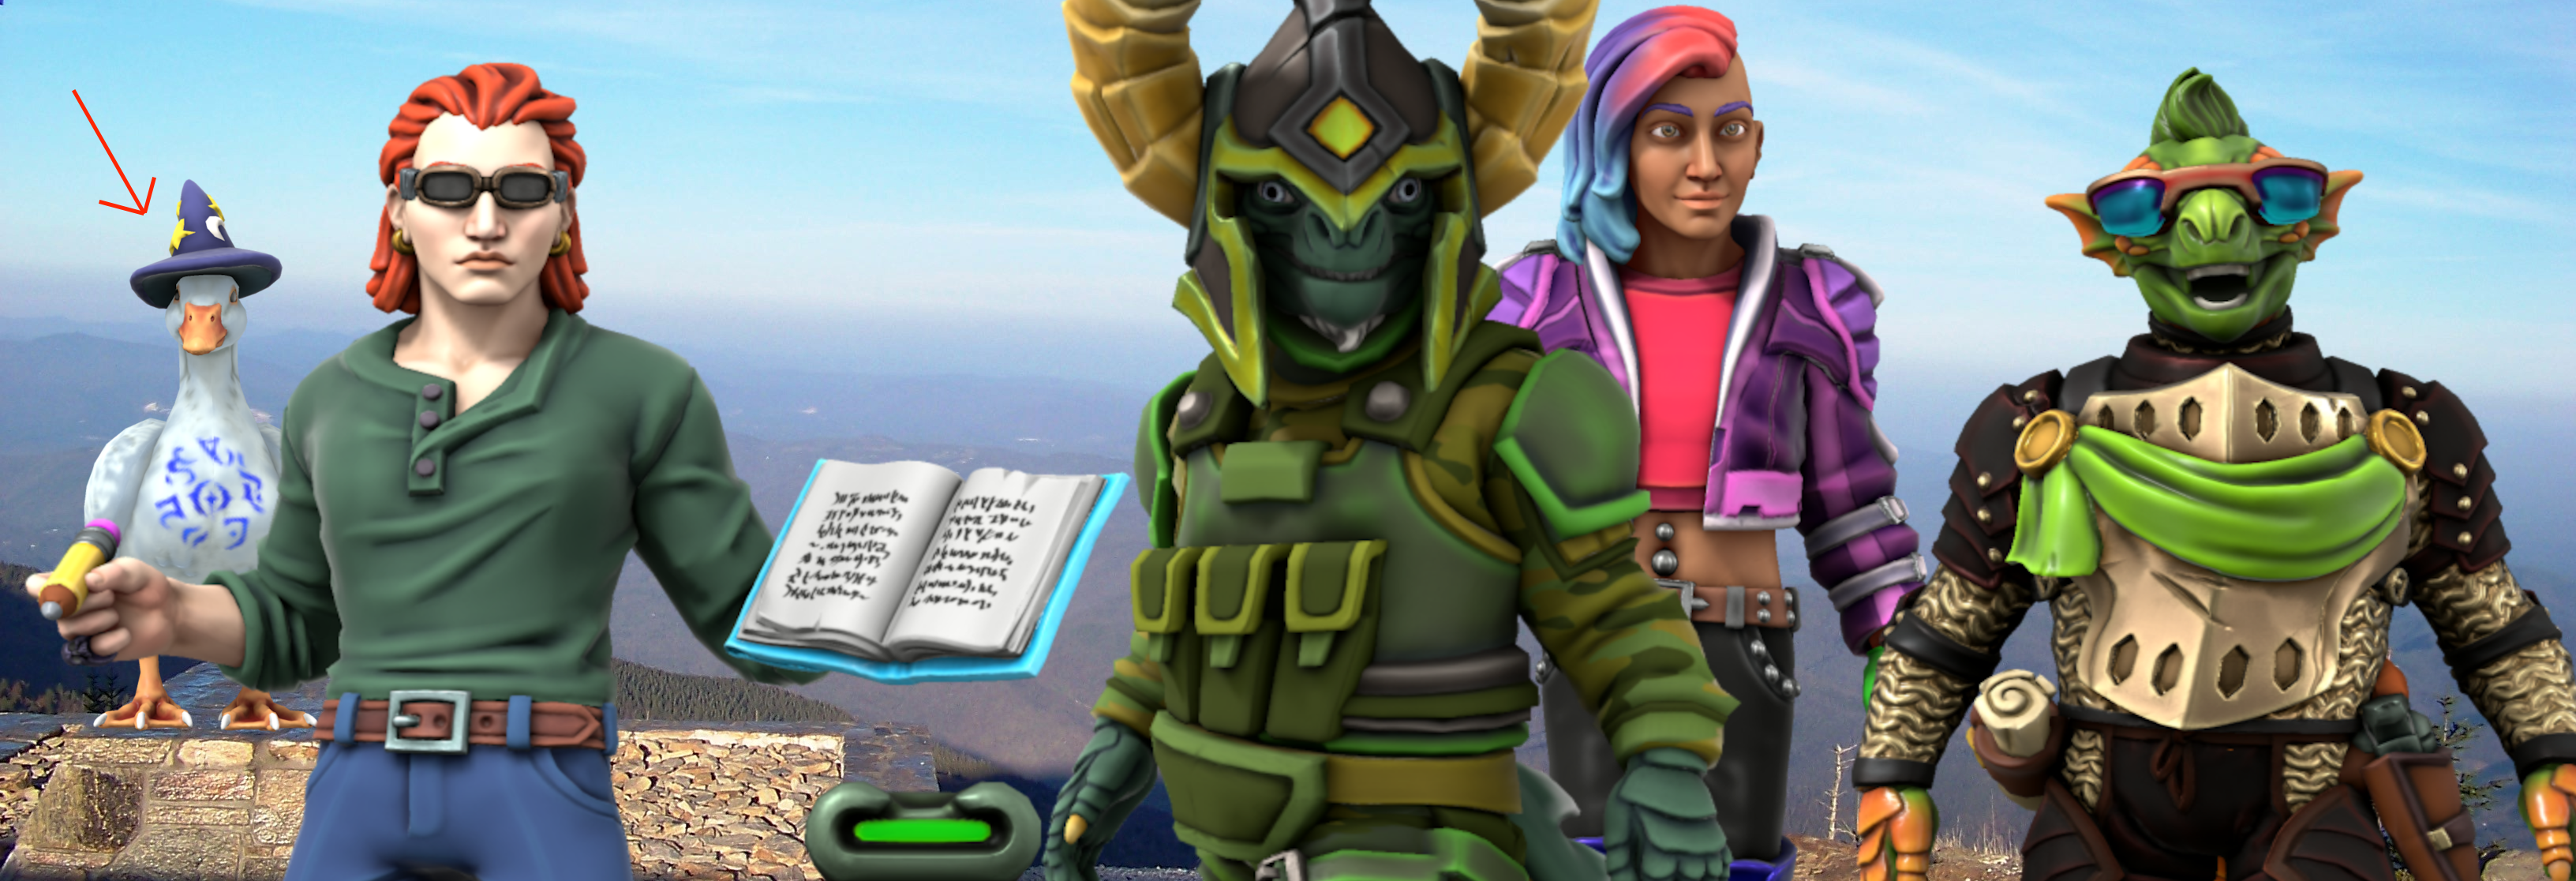 A duck in a wizard's hat, a red-haired man in shades and a green shirt with a book, a lizard man with a horned helm, a bright neon-dressed punk, and a lizardwoman in shades, against a blue sky